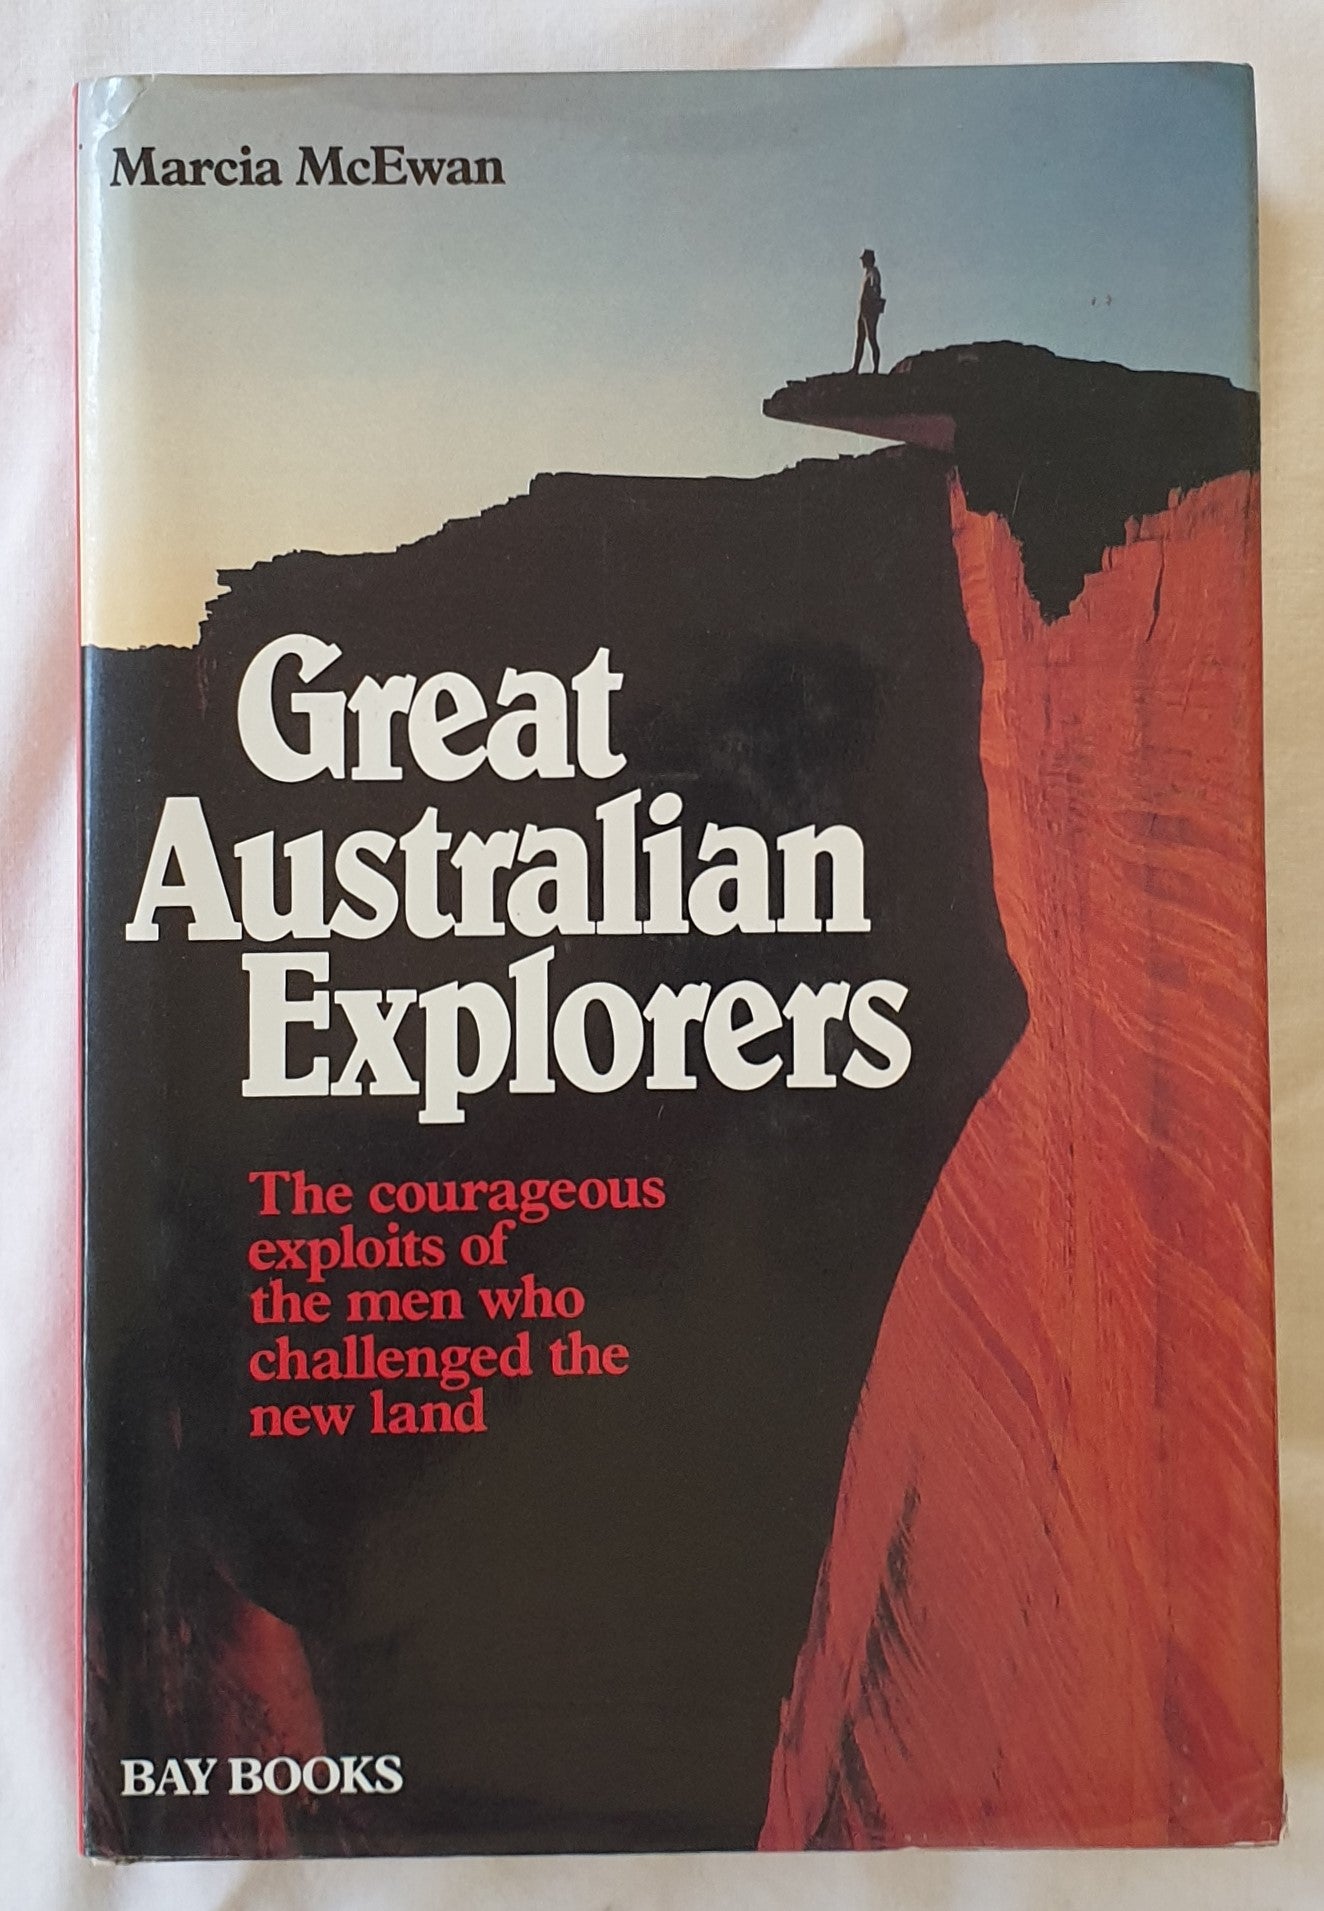 Great Australian Explorers  The courageous exploits of the men who challenged the new land  by Marcia McEwan